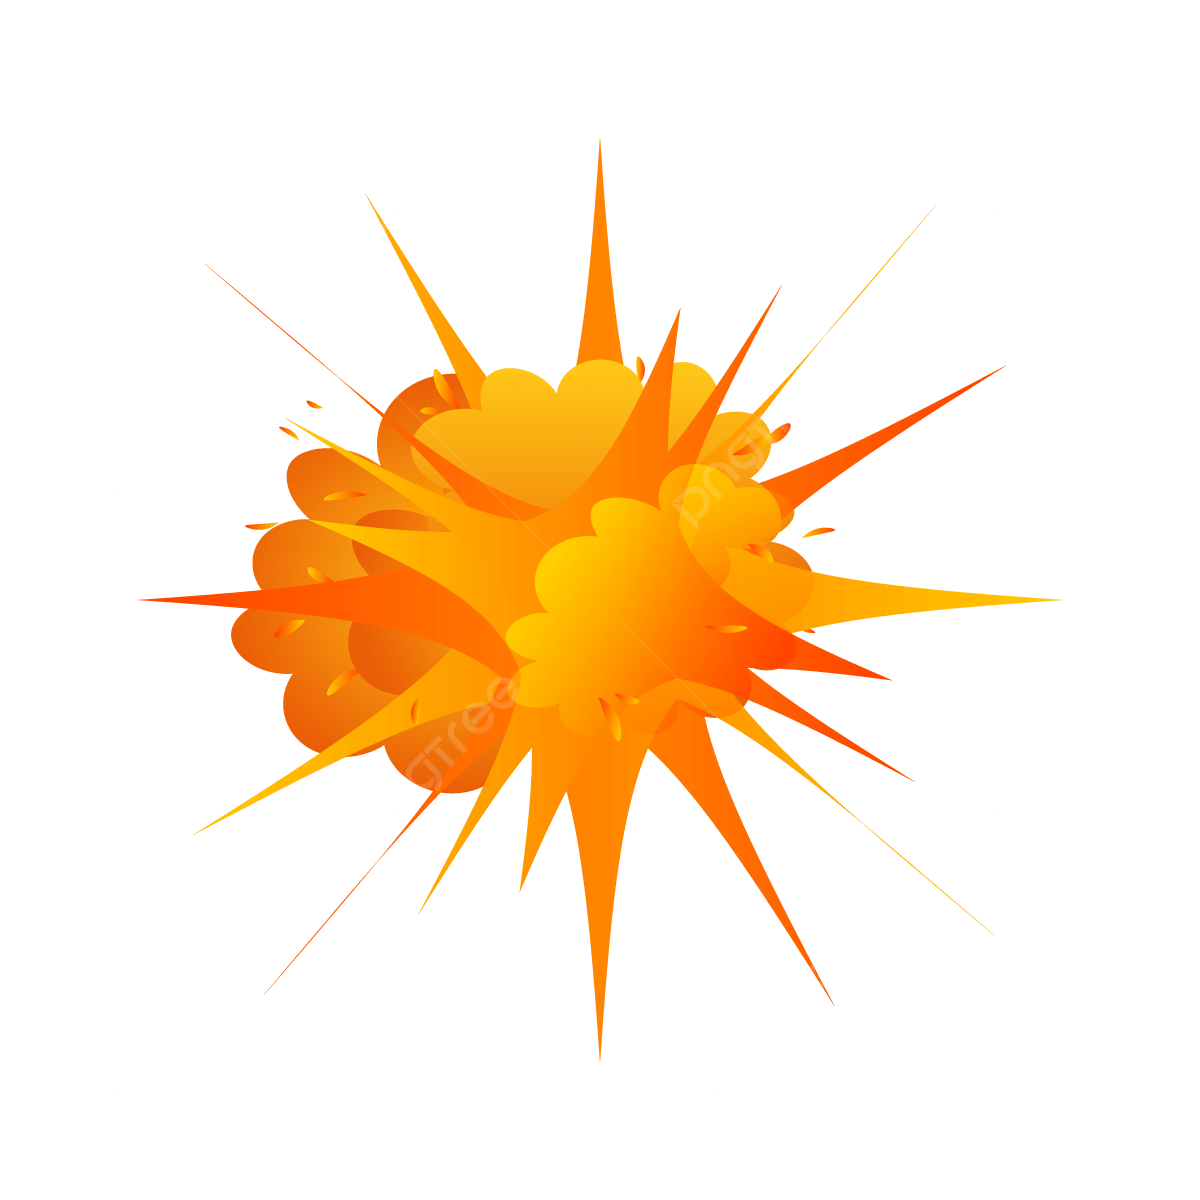 Cartoon Explosion PNG Image File